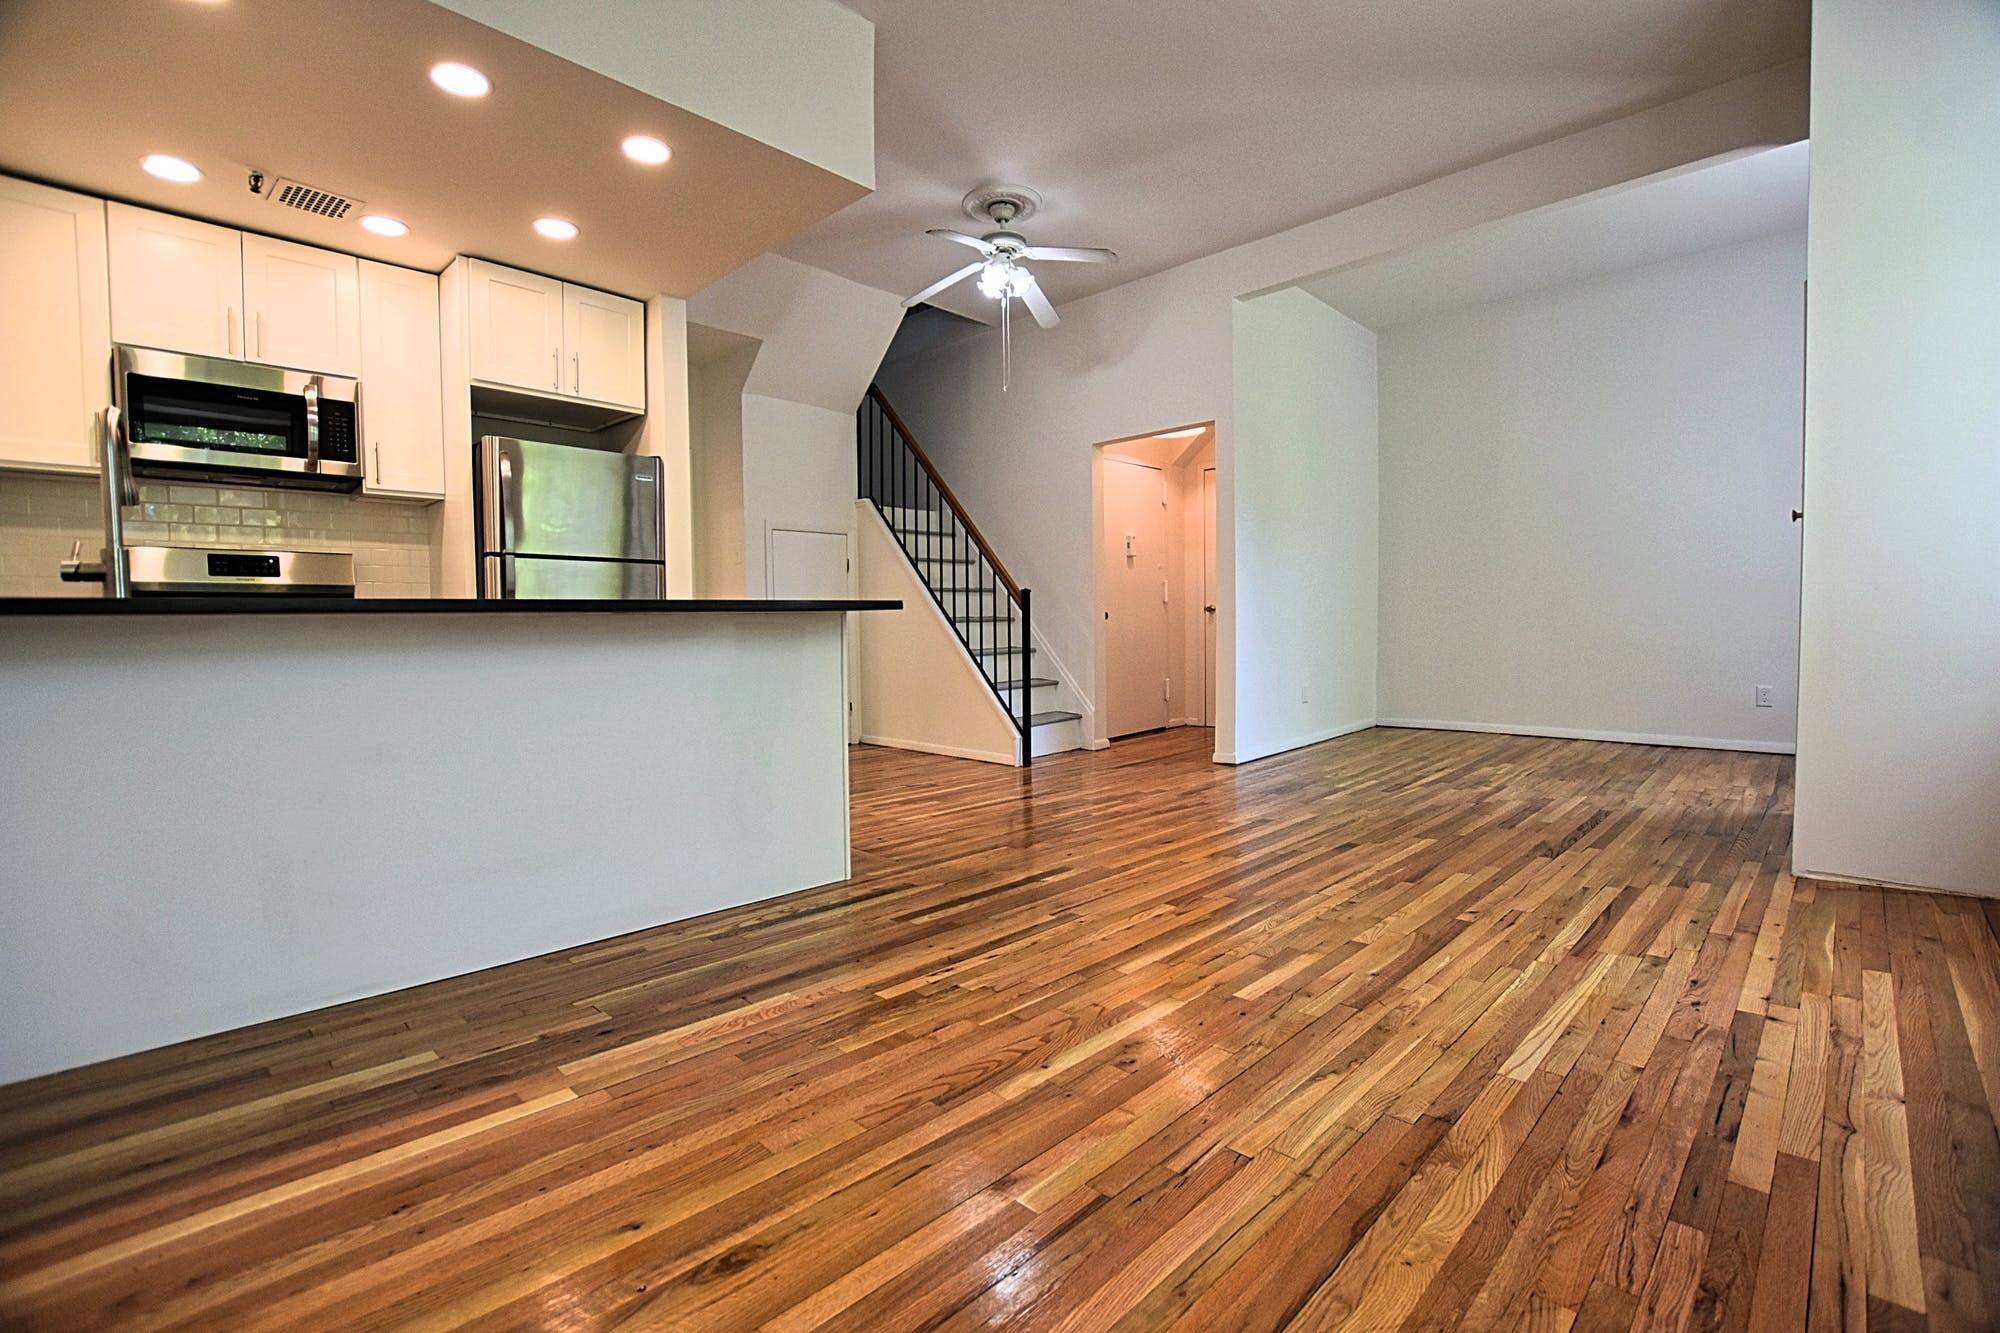 Introducing the newly renovated 311 Atlantic Ave Apt 3 This 2 bedroom 2 Bathroom duplex has a ton of storage space and natural light.